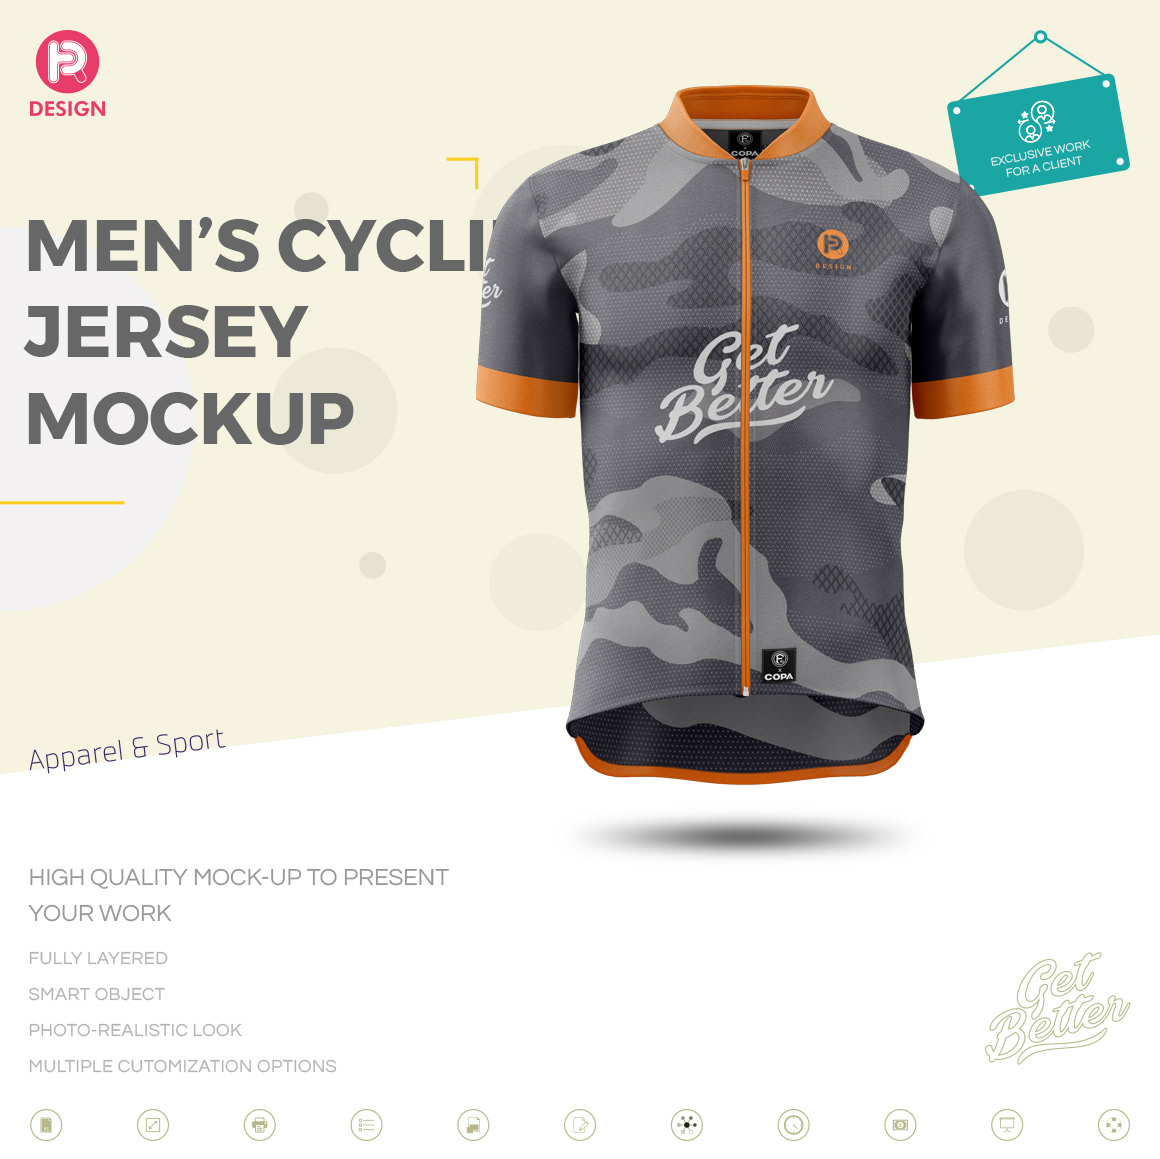 Download Bike Jersey Mockup Projects Photos Videos Logos Illustrations And Branding On Behance Free Mockups